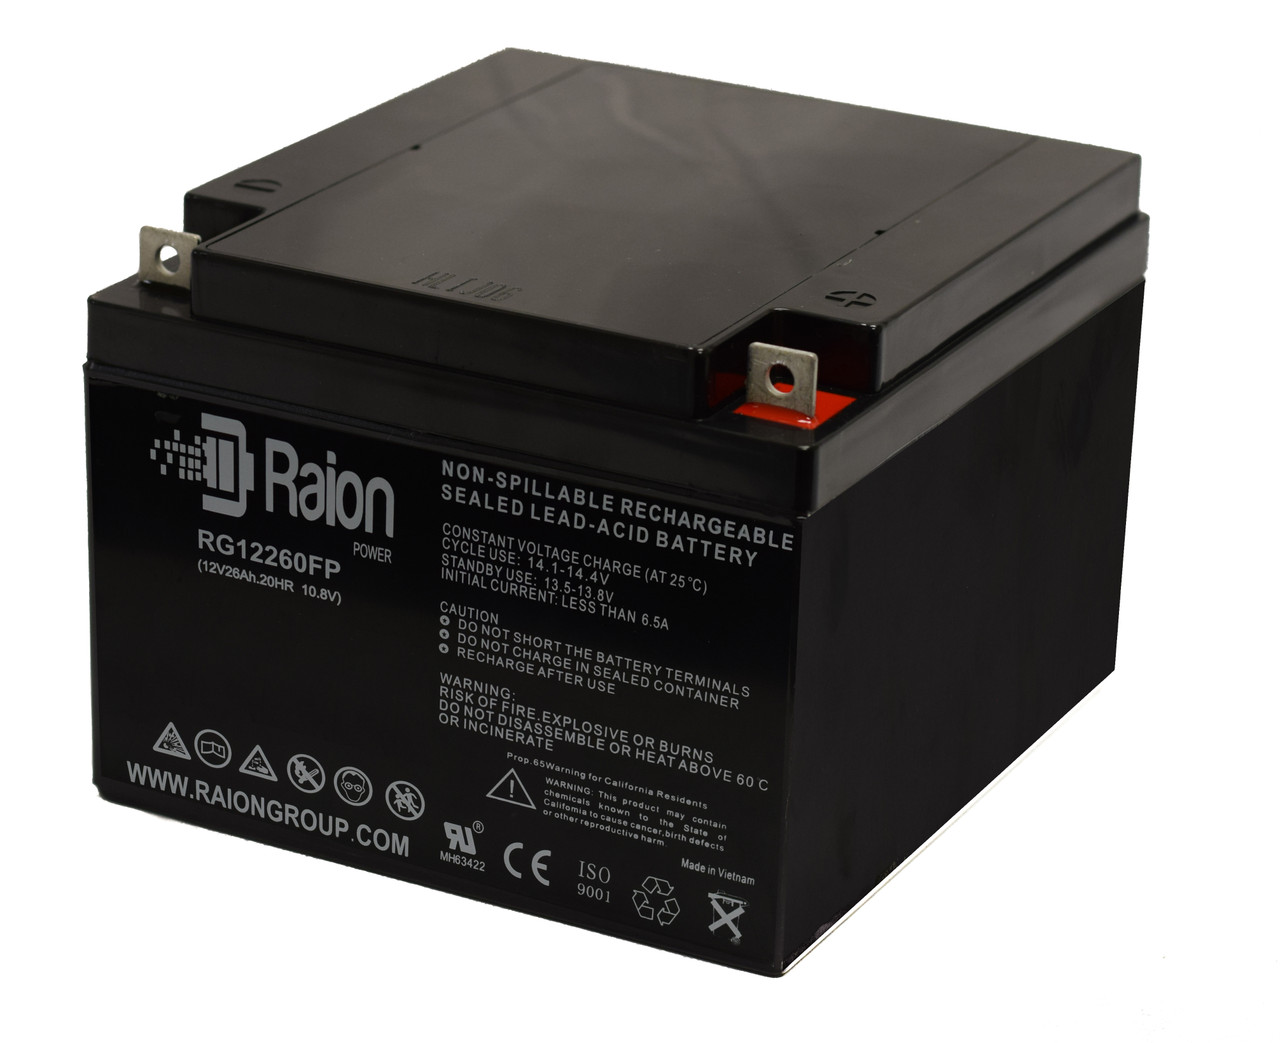 Raion Power Replacement 12V 26Ah Battery for Europower EPL 28-12 - 1 Pack